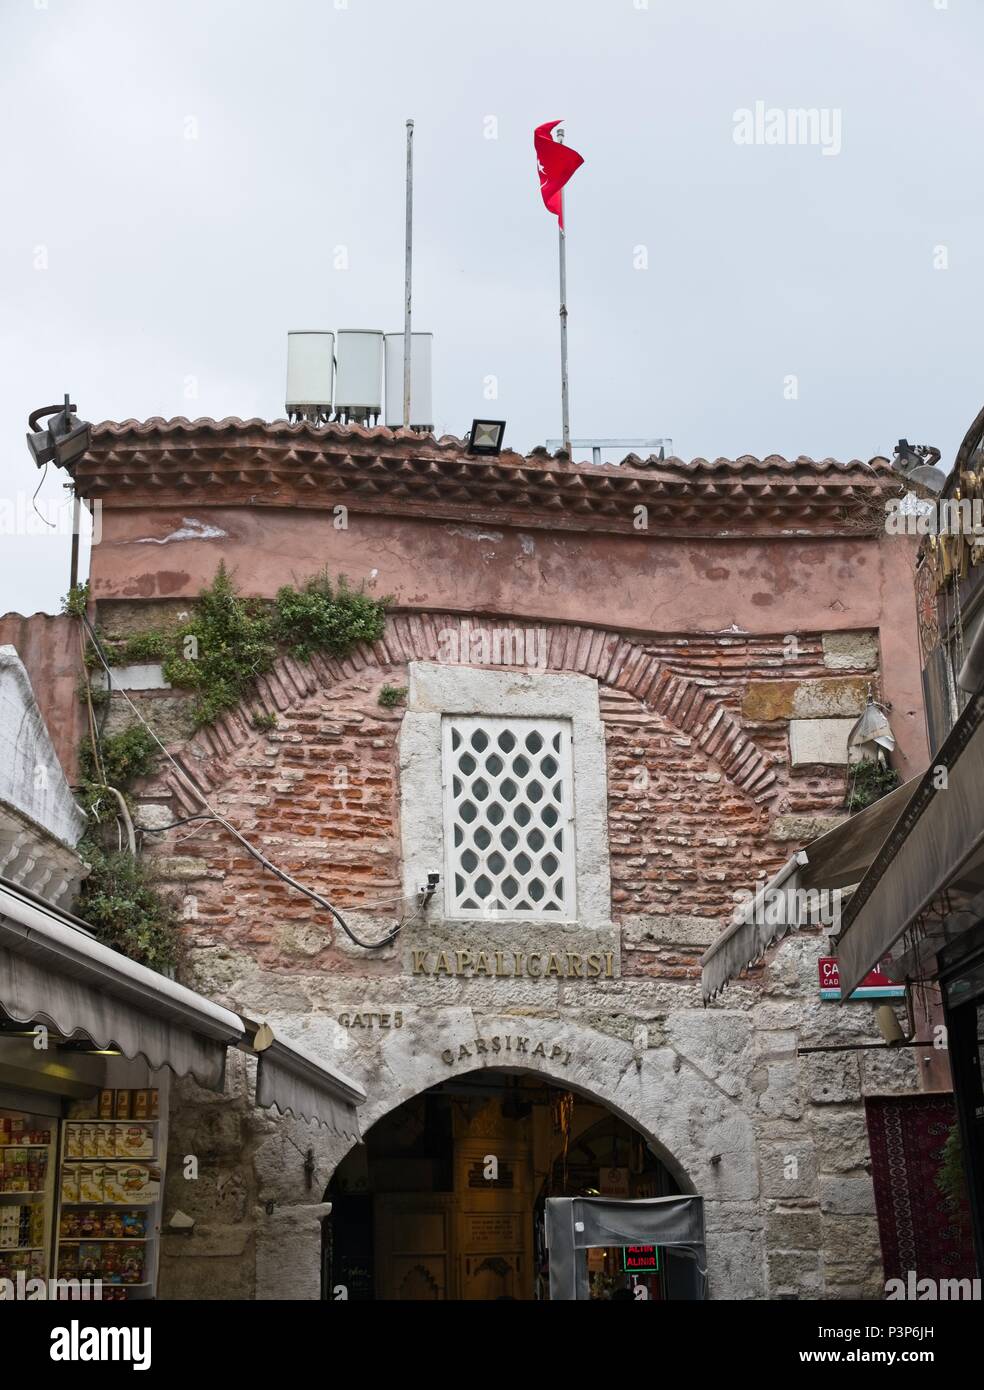 ISTANBUL, TURKEY - MAY 25 : Entrance to the Grand Bazaar in Istanbul Turkey on May 25, 2018 Stock Photo